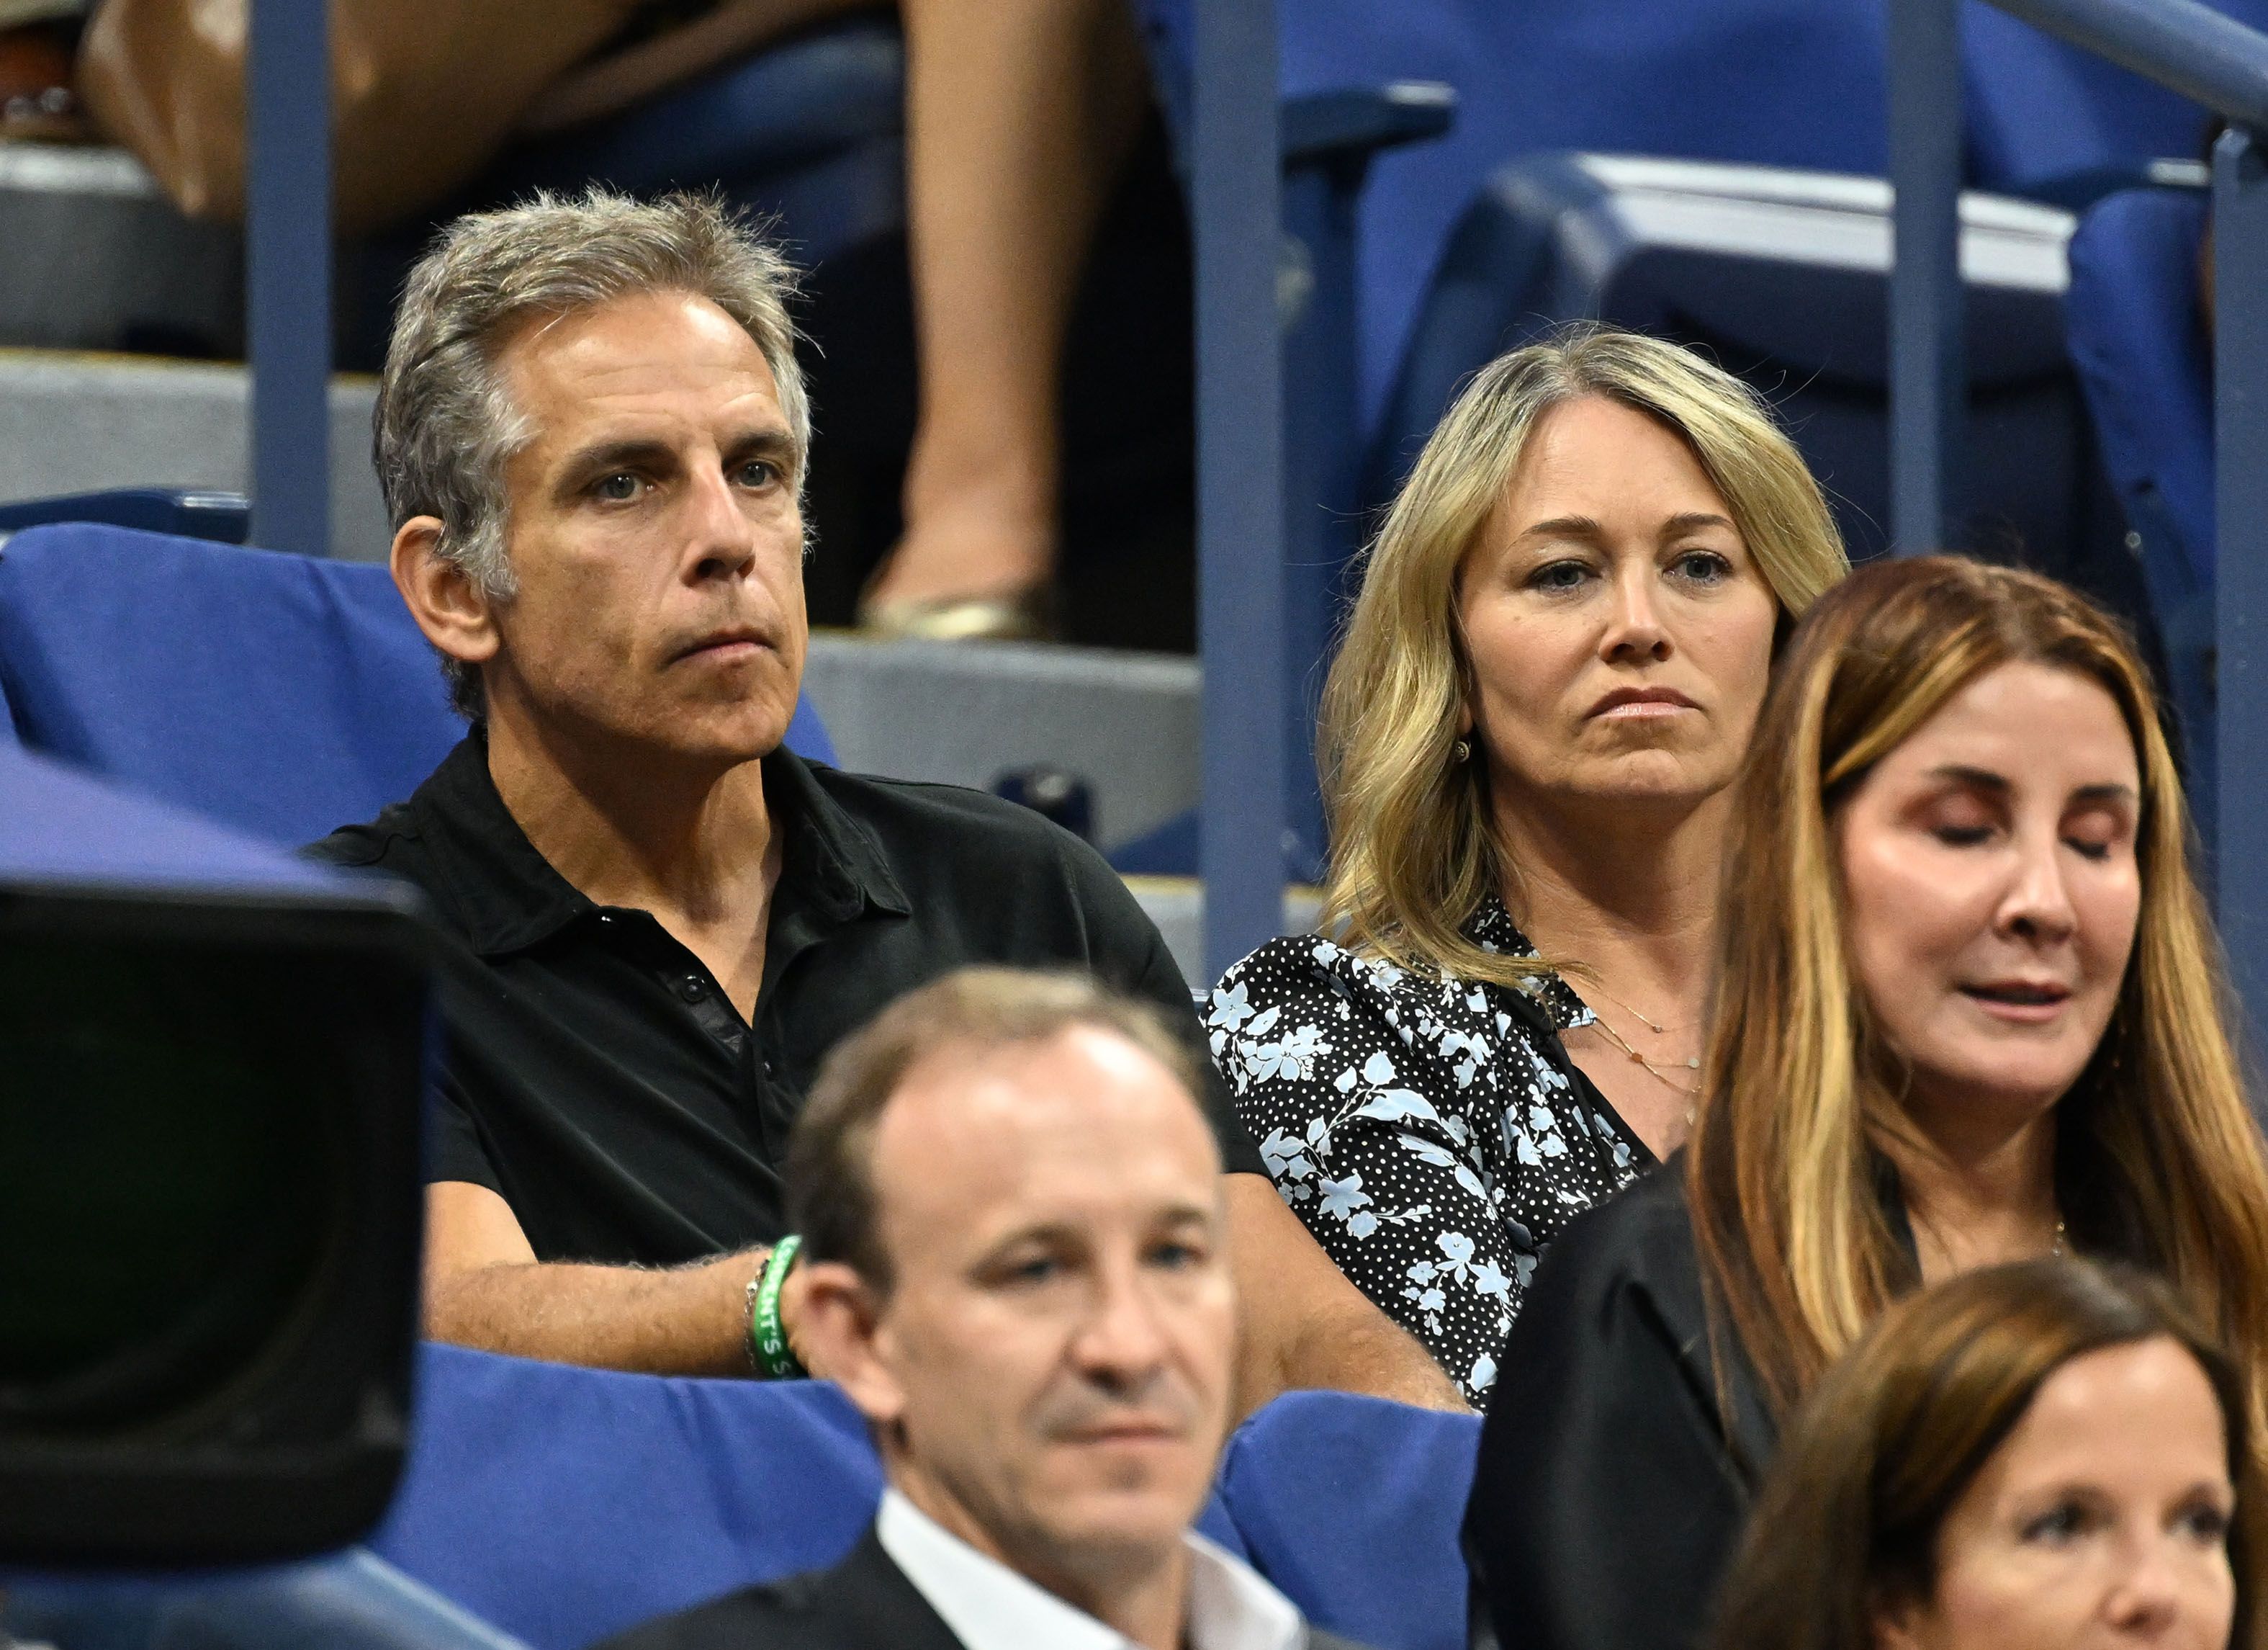 Why did Ben Stiller and his wife Christine Taylor almost get divorced?